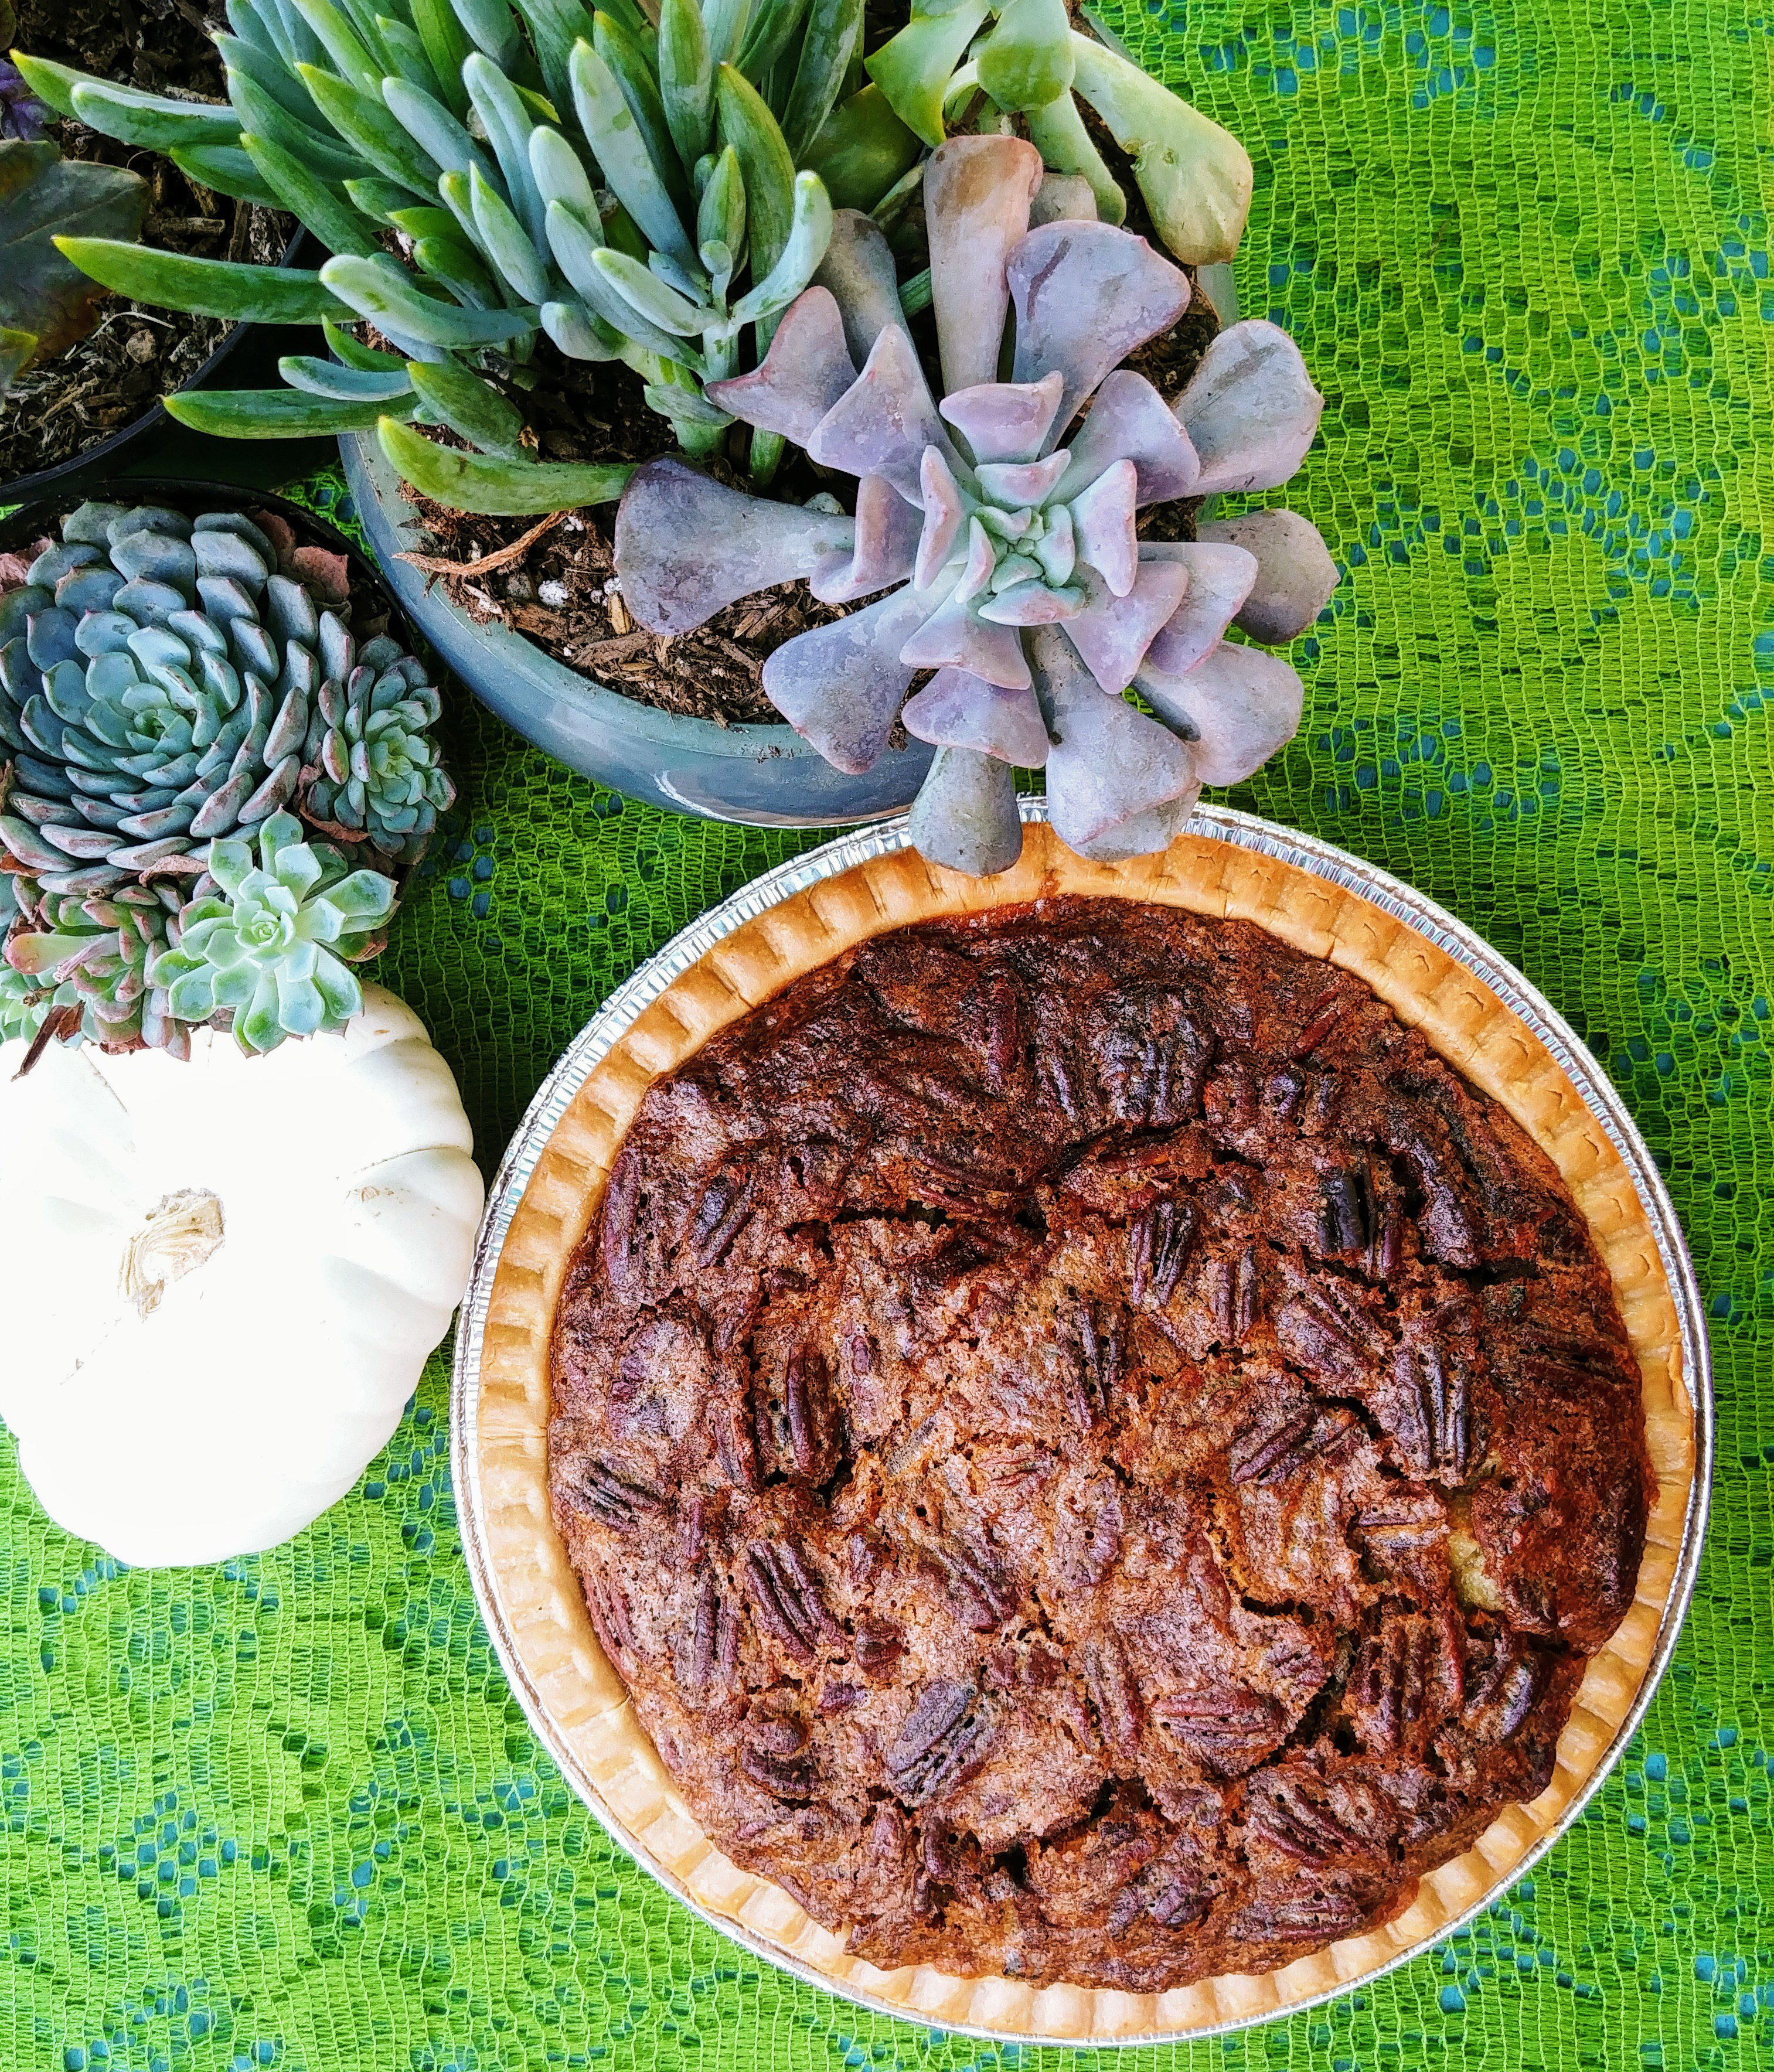 Pecan pie is quick and delicious